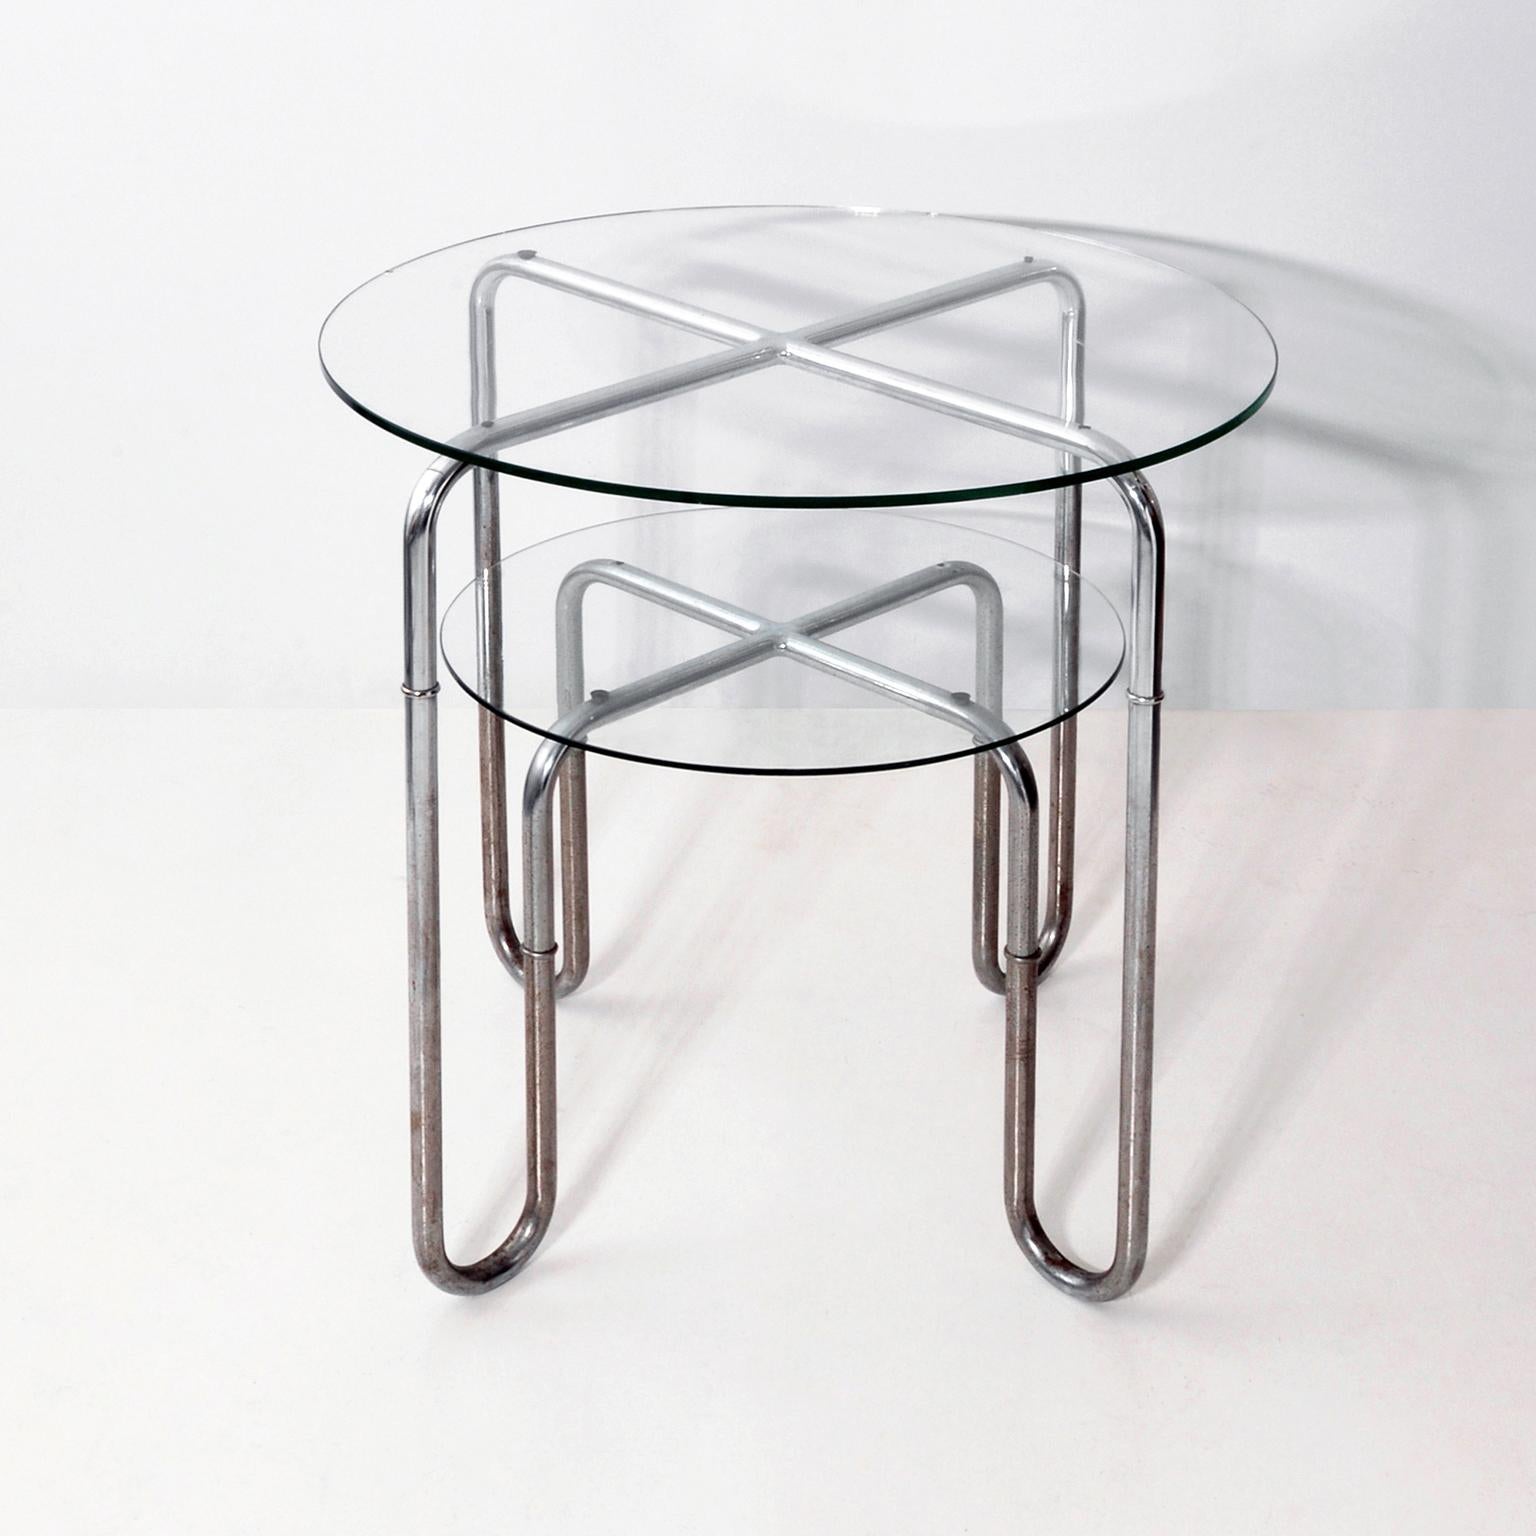 Bauhaus chrome plated tubular steel round table with glass tops. The table is attributed to Josef and Leopold Quittner, Vienna, circa. 1930.